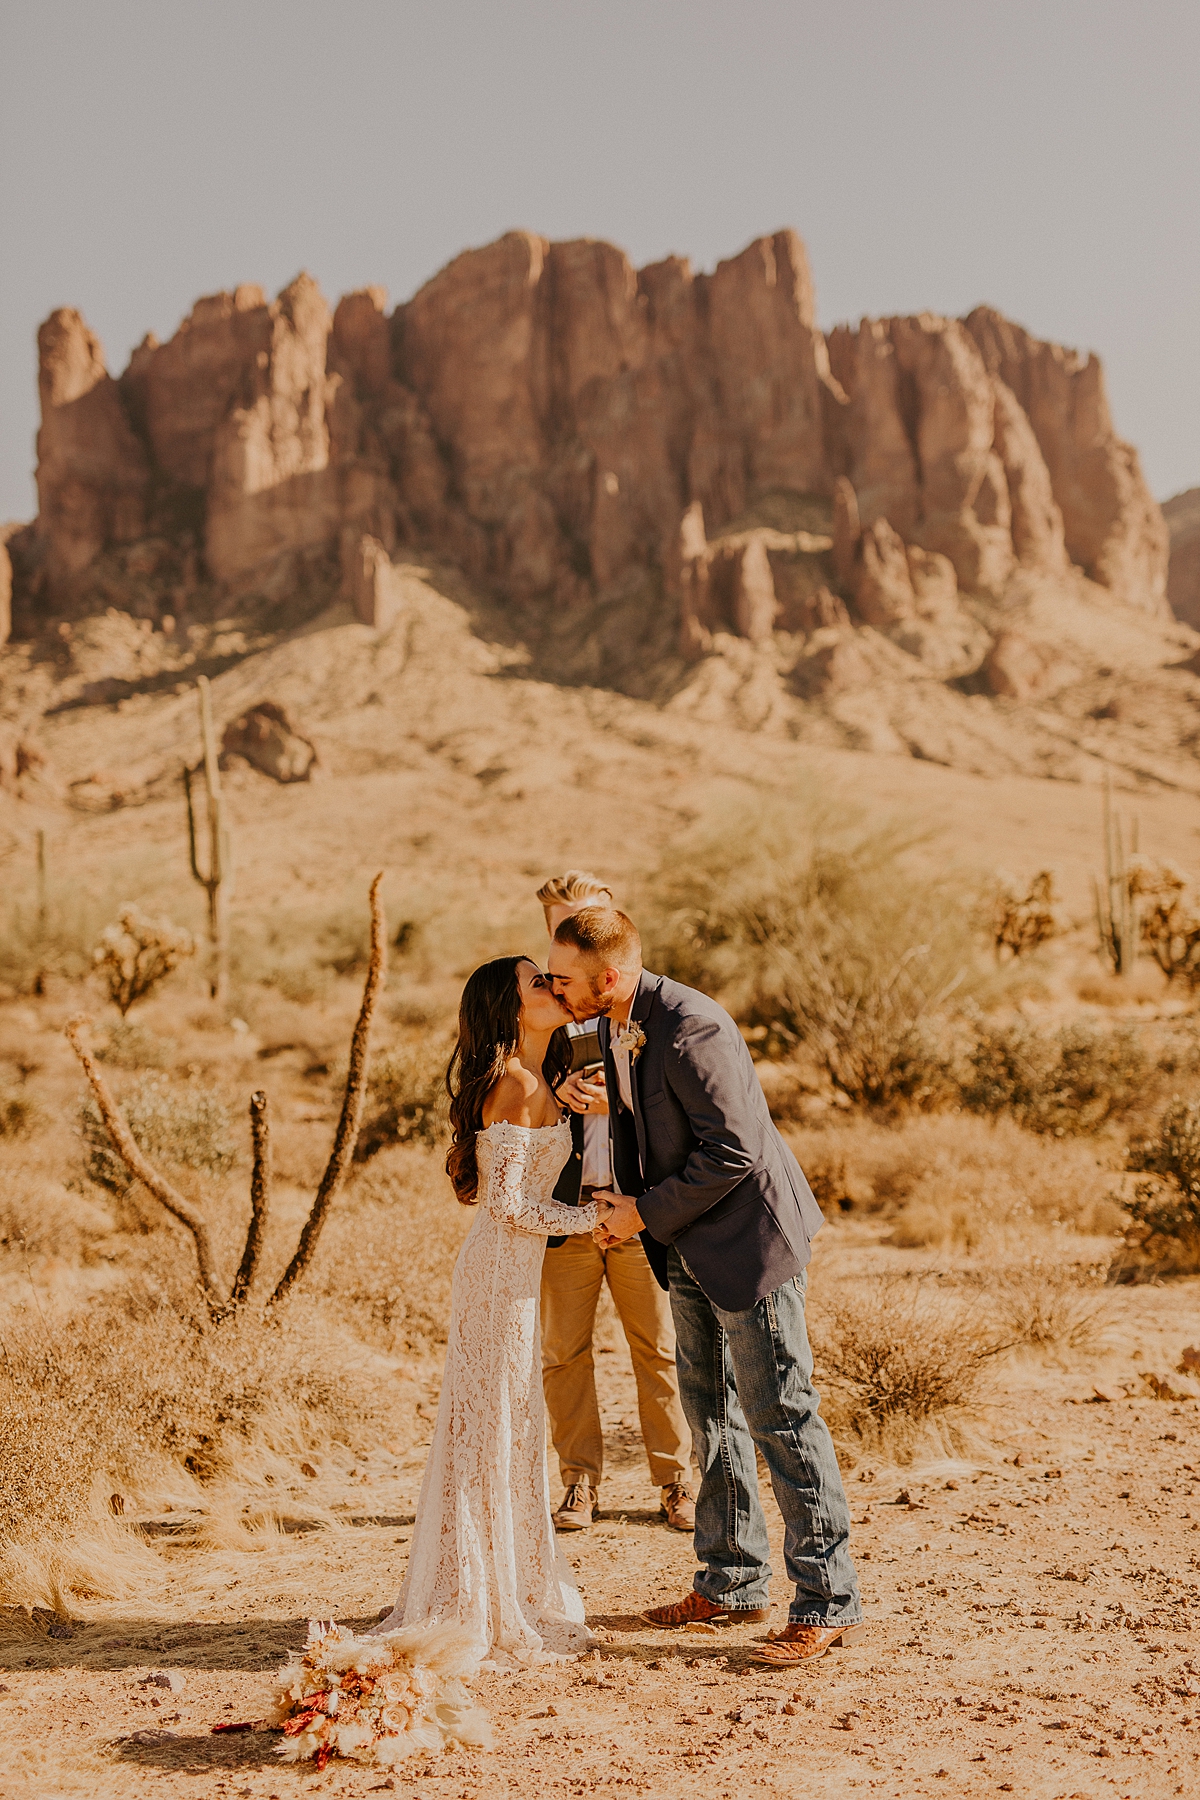 Intimate-elopement-in-superstition-mountain-wilderness-allison-slater-photography28.jpg